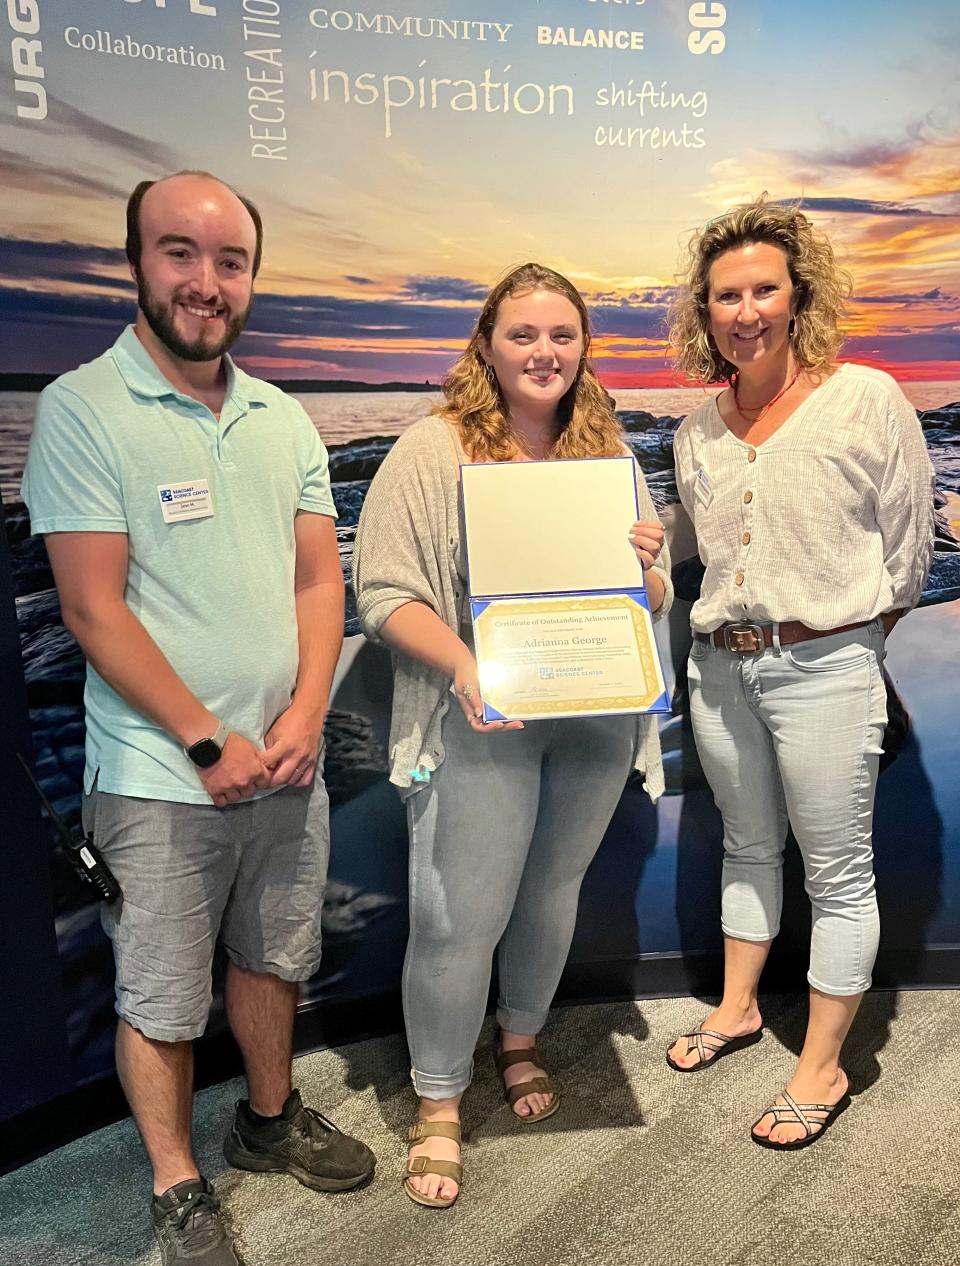 Sean McKenna, left, director of the Seacoast Science Center Marine Science Fellowship program for high school students, and Kate Leavitt, SSC’s Chief Program Officer, right, honored Adrianna George, center, for her achievement in the Marine Science Fellowship Program.